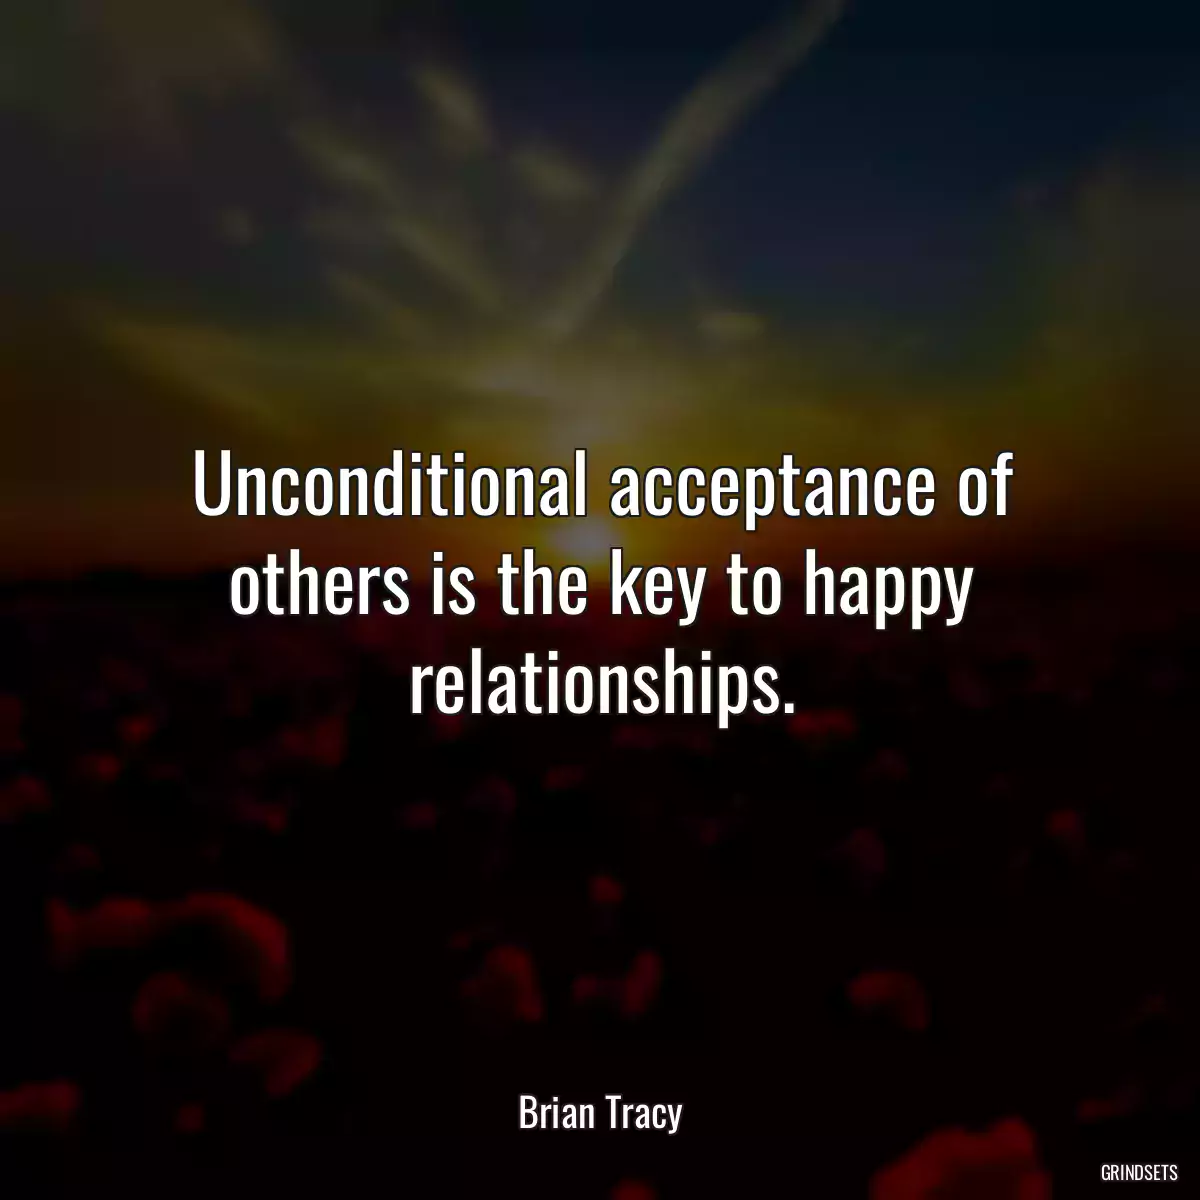 Unconditional acceptance of others is the key to happy relationships.